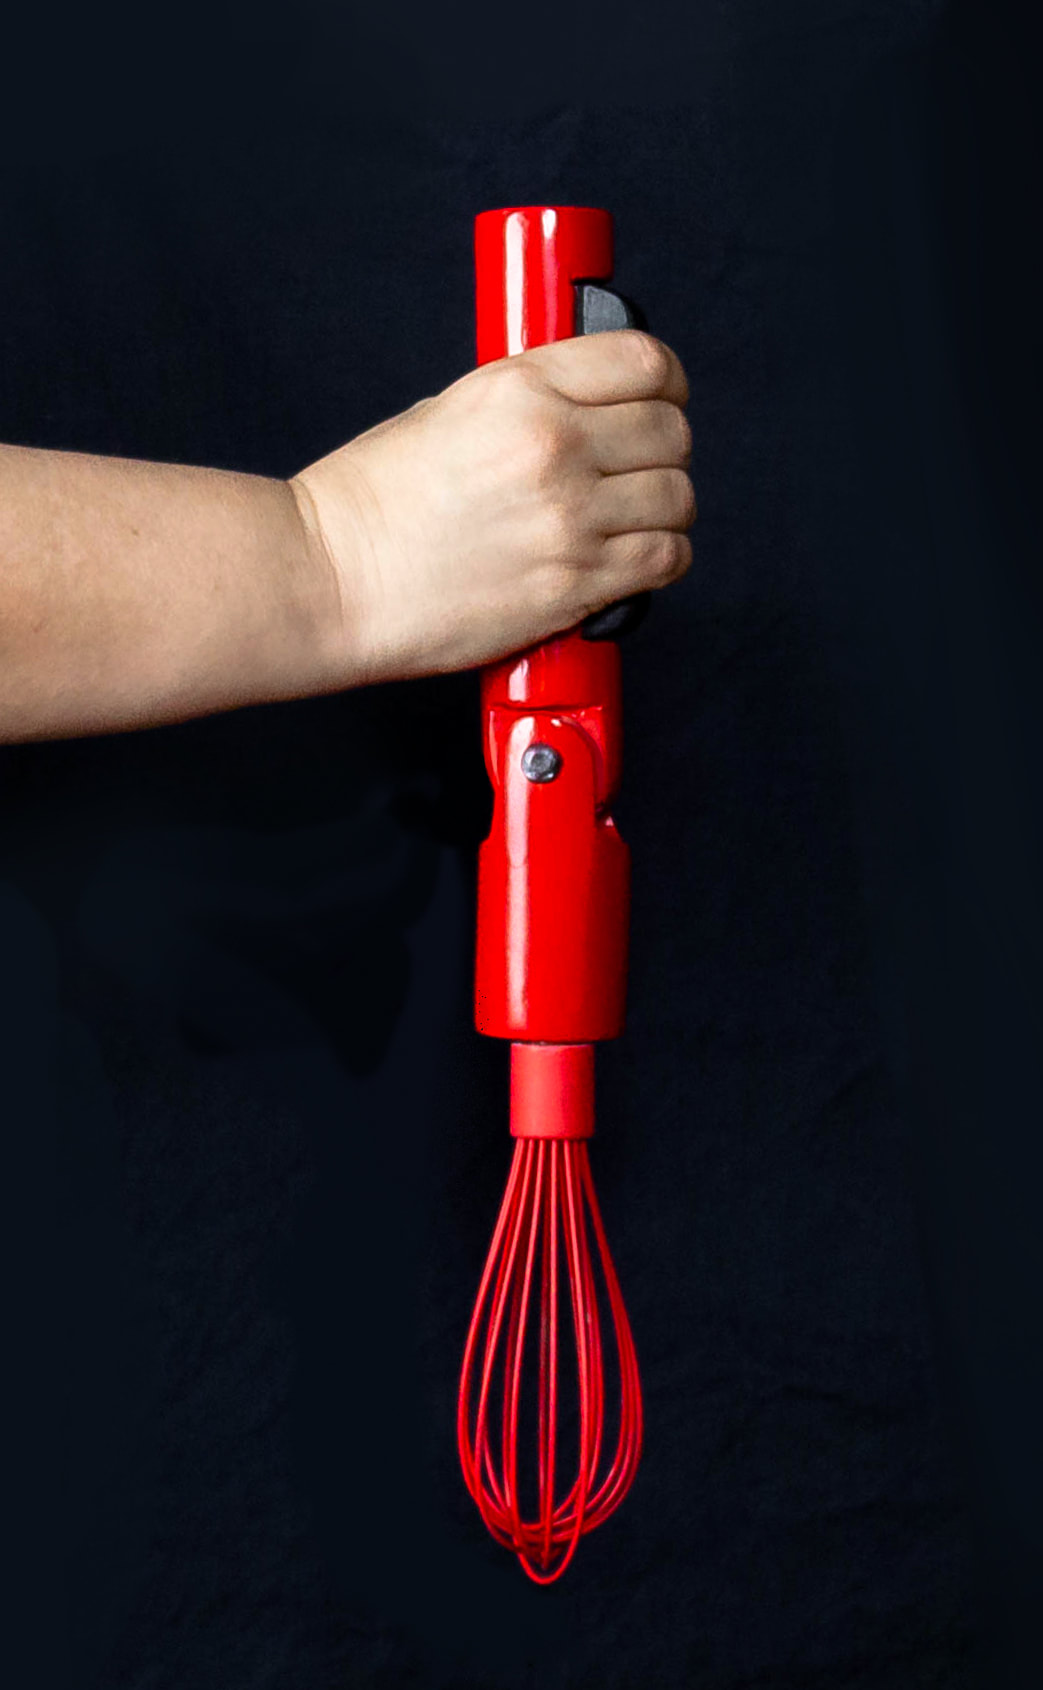 Holding the ergo whisk model in the extended verticle position.